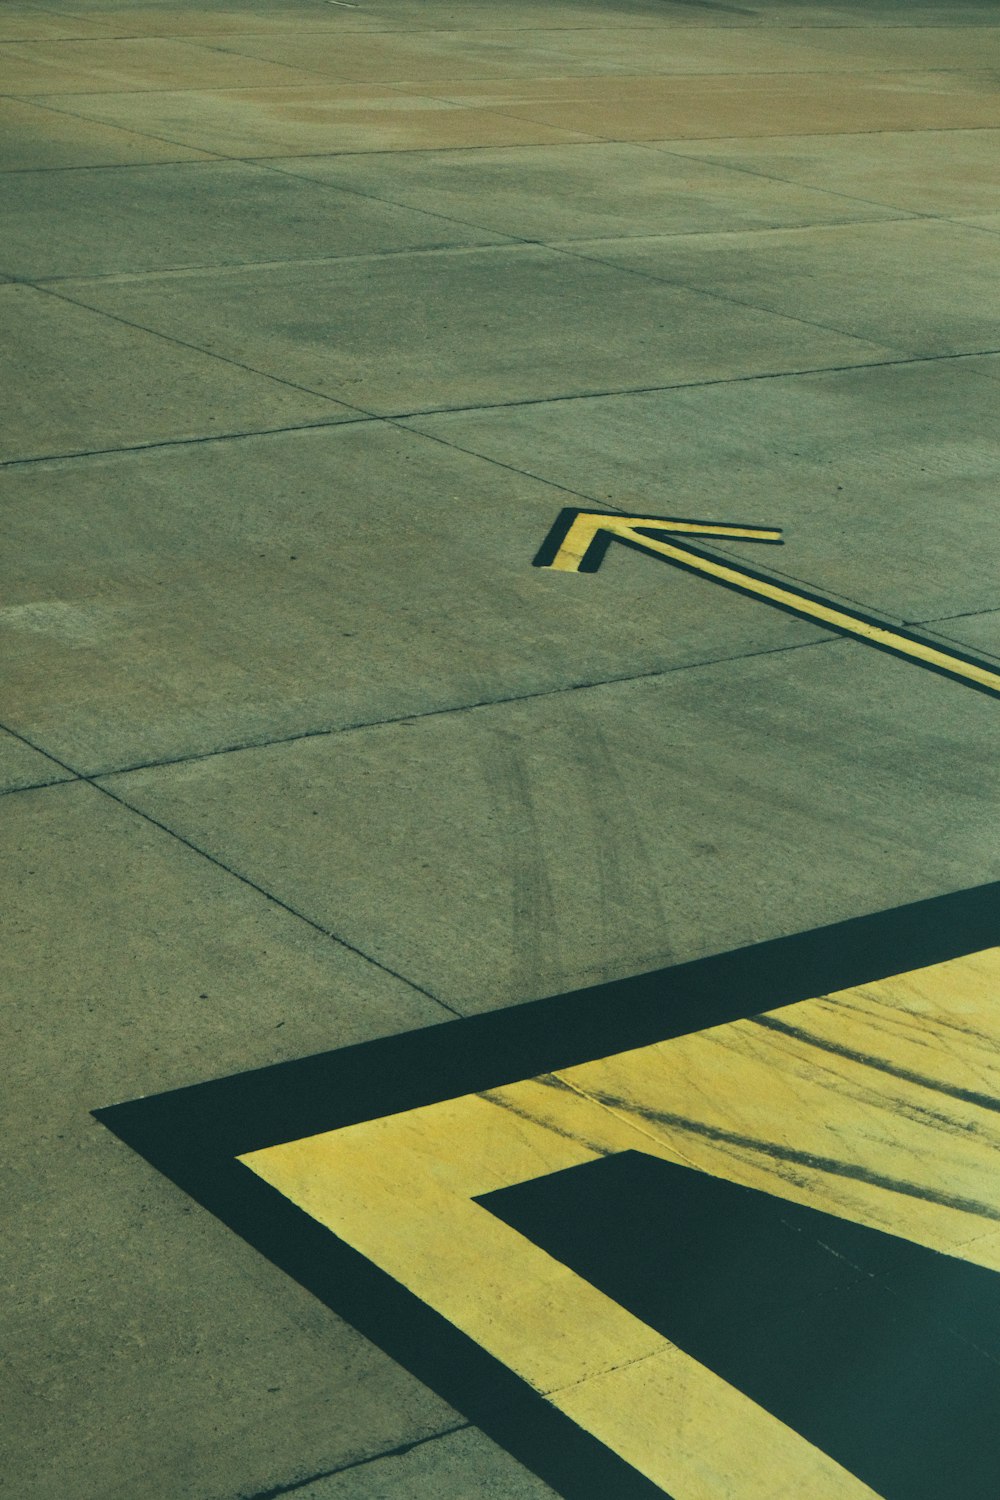 a yellow line on a paved area